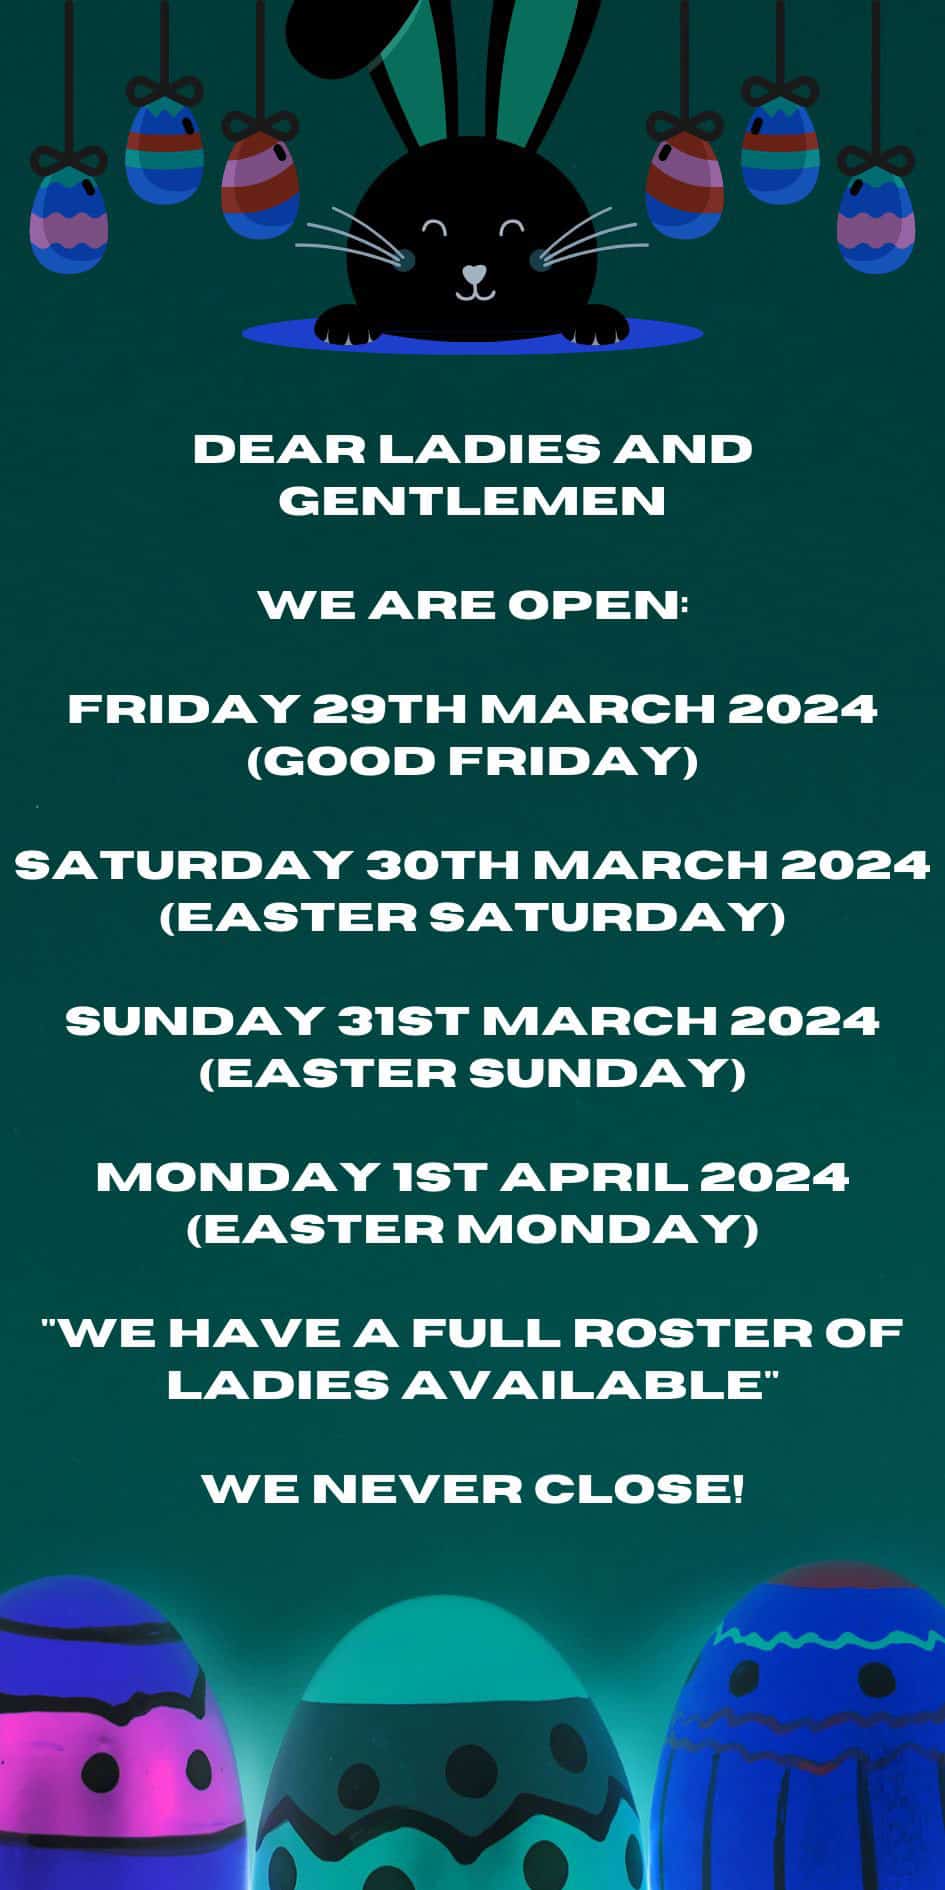 Easter opening hours notice